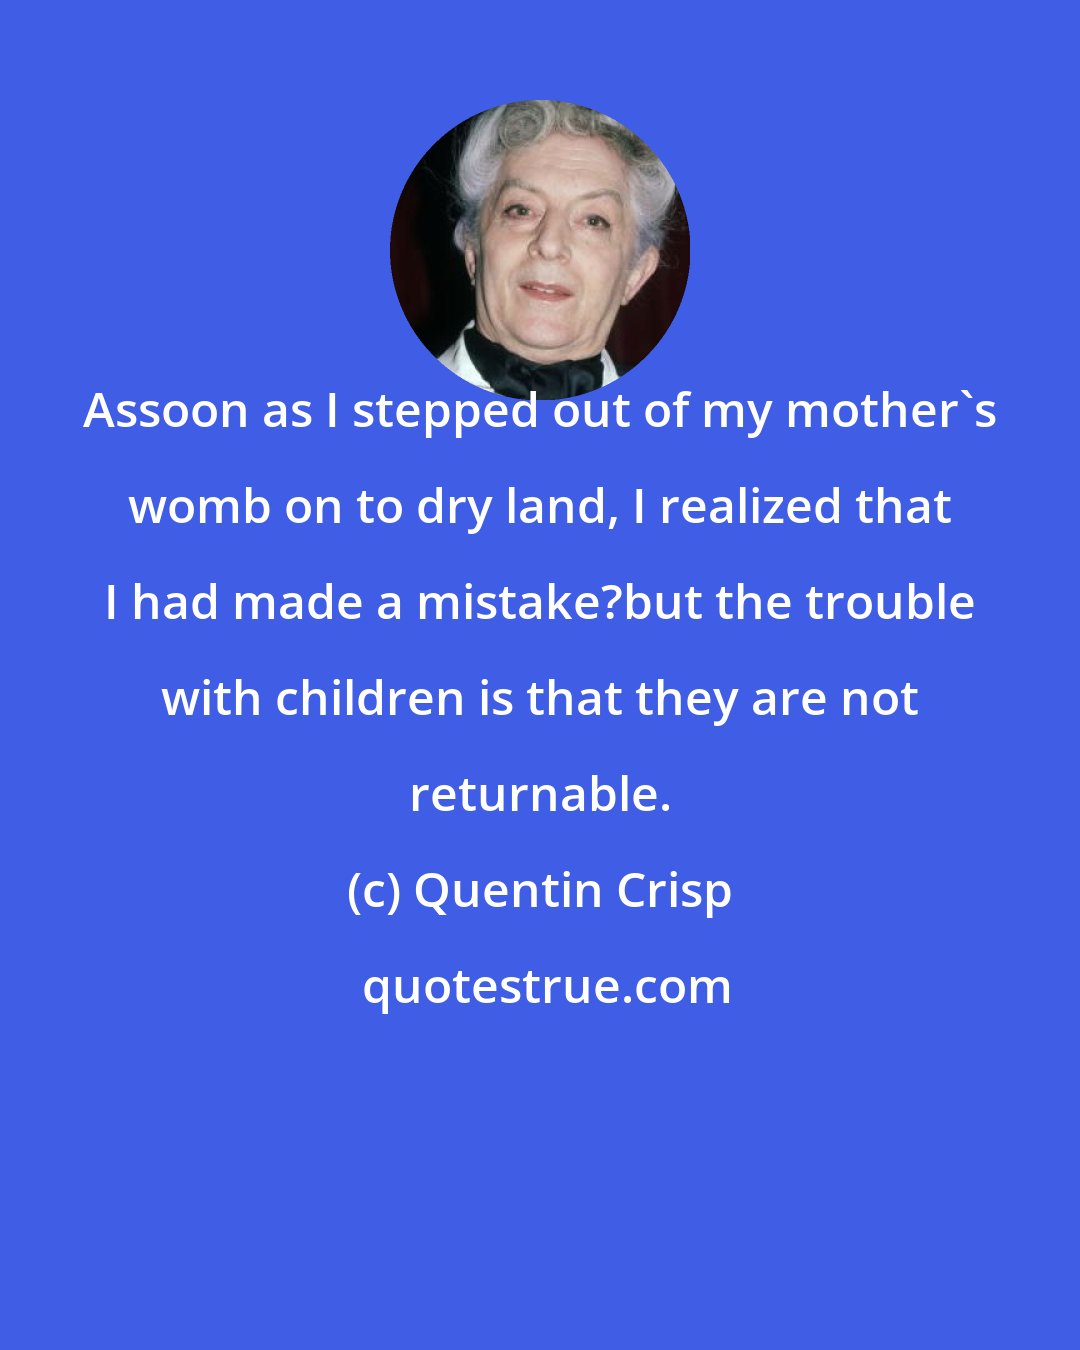 Quentin Crisp: Assoon as I stepped out of my mother's womb on to dry land, I realized that I had made a mistake?but the trouble with children is that they are not returnable.